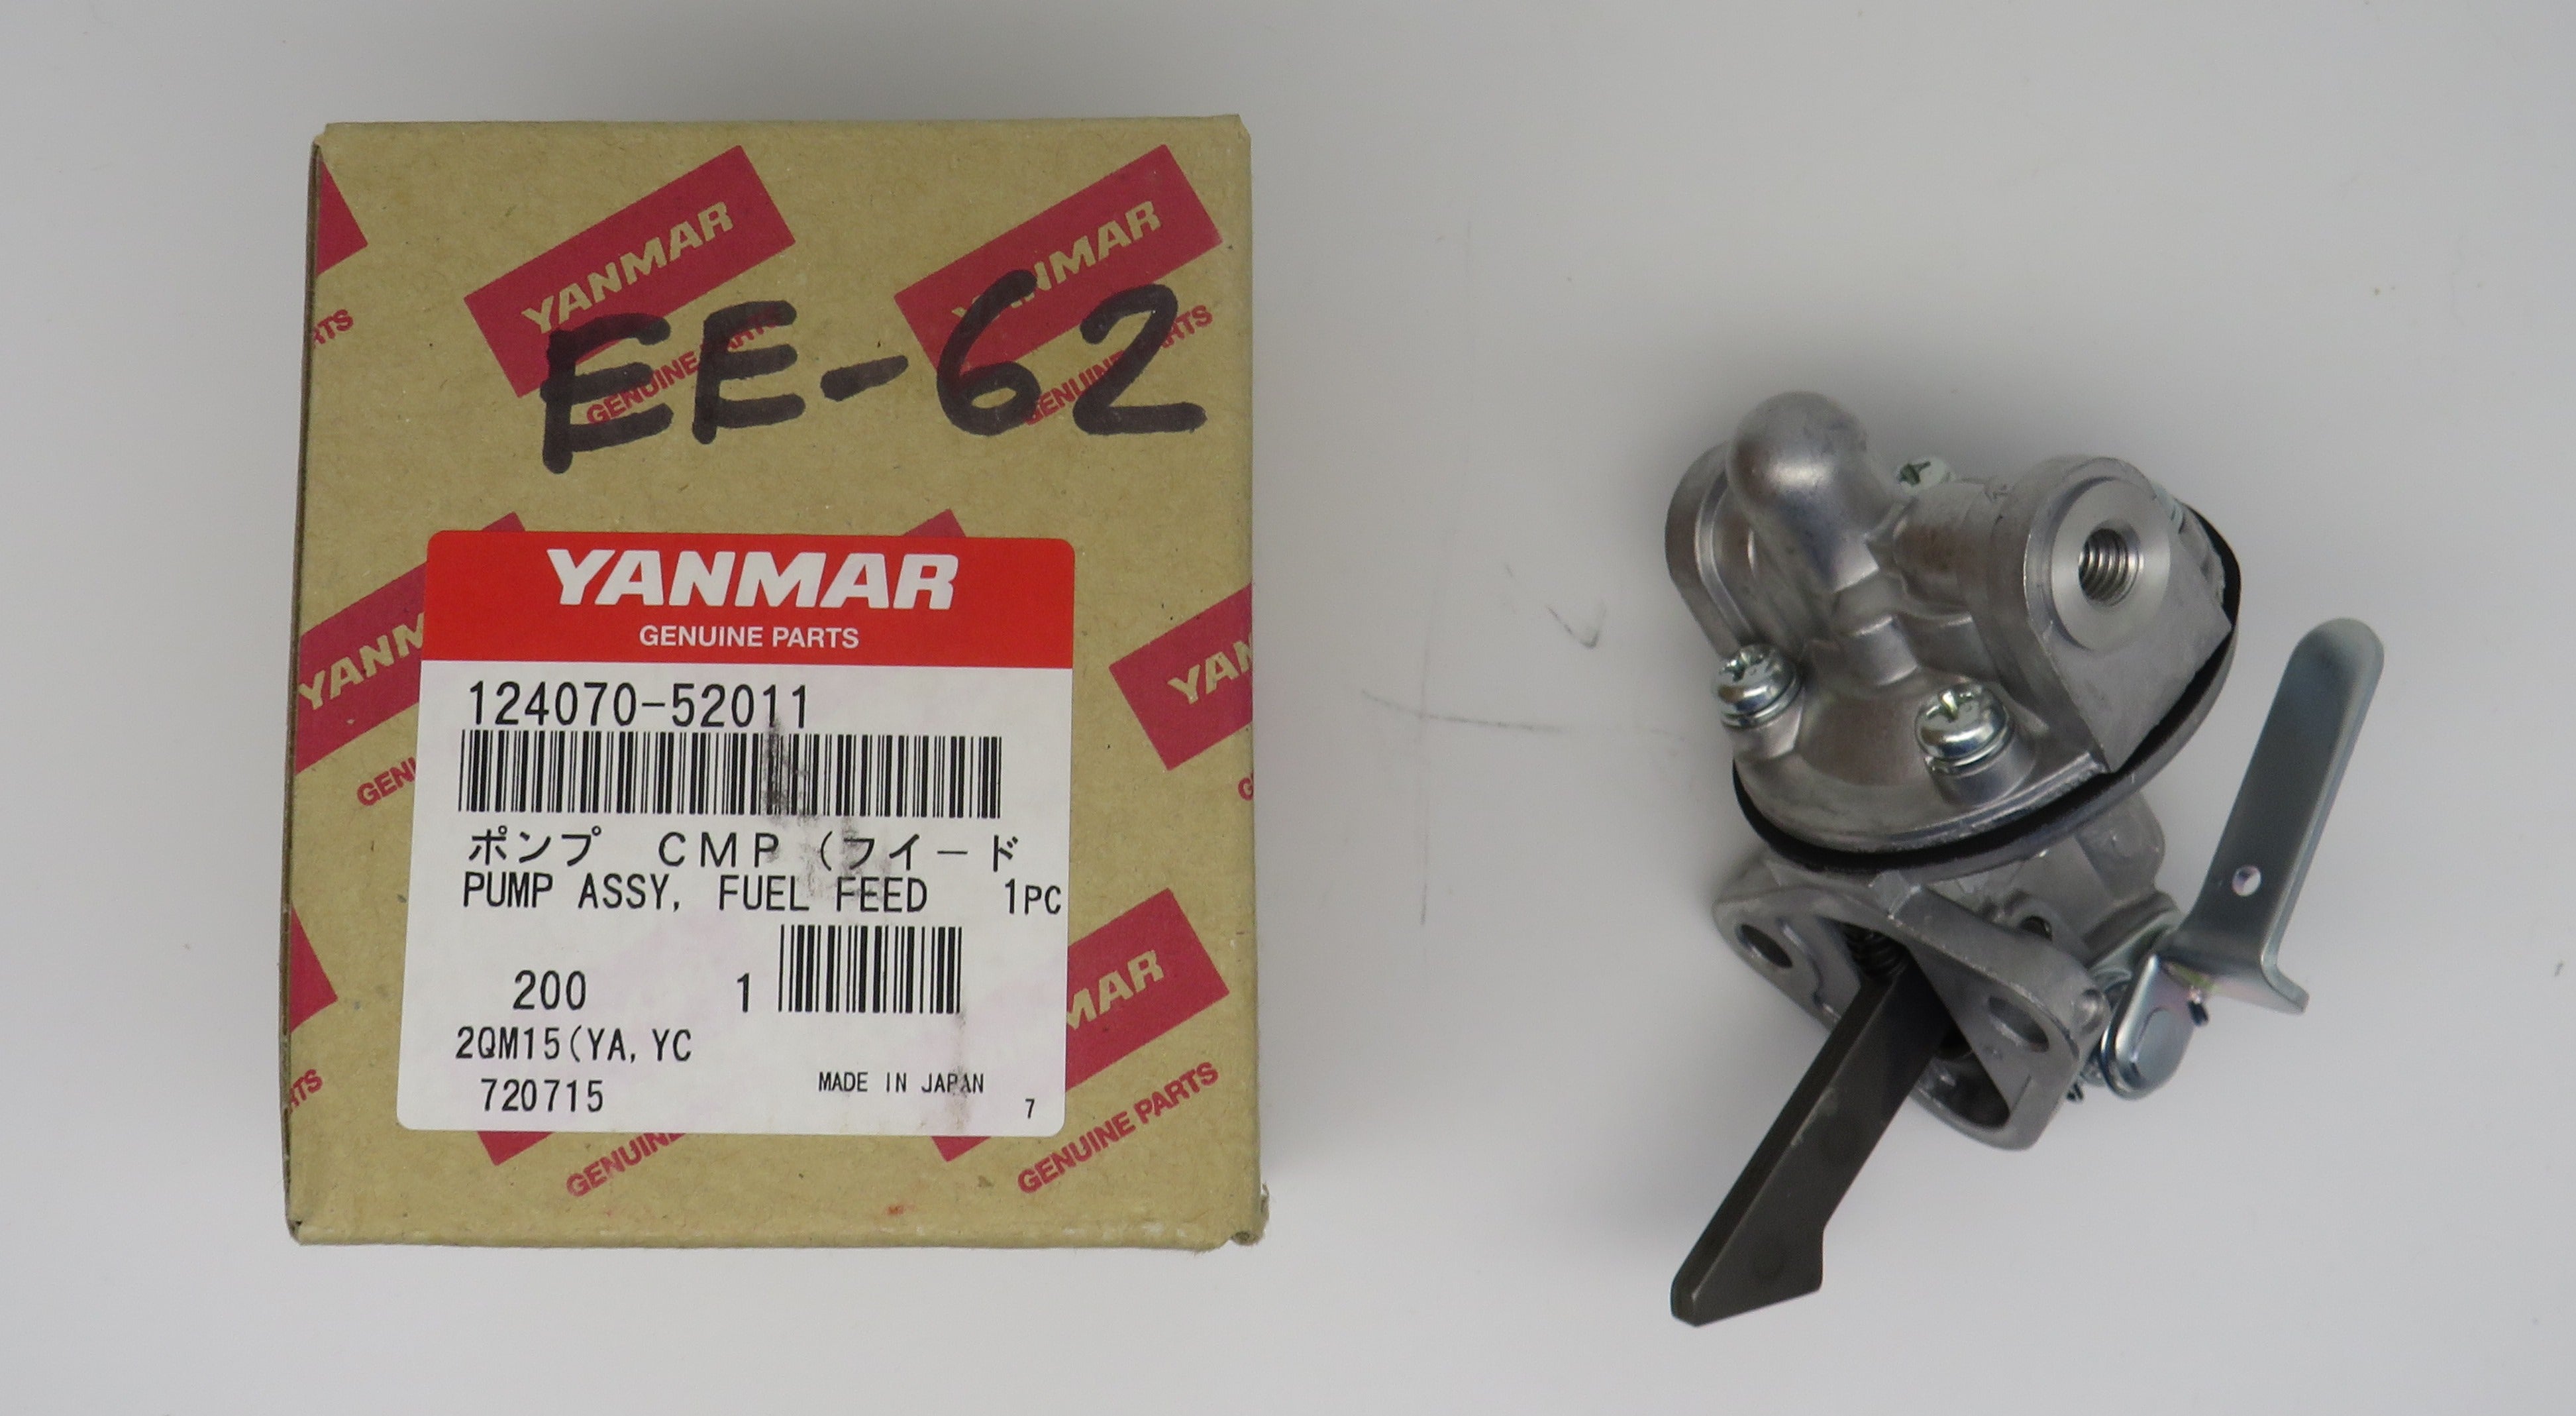 124070-52010 Yanmar Fuel Feed Pump Assembly (Supersedes to 124070-52011) gasket is part number 121520-01851 and Included